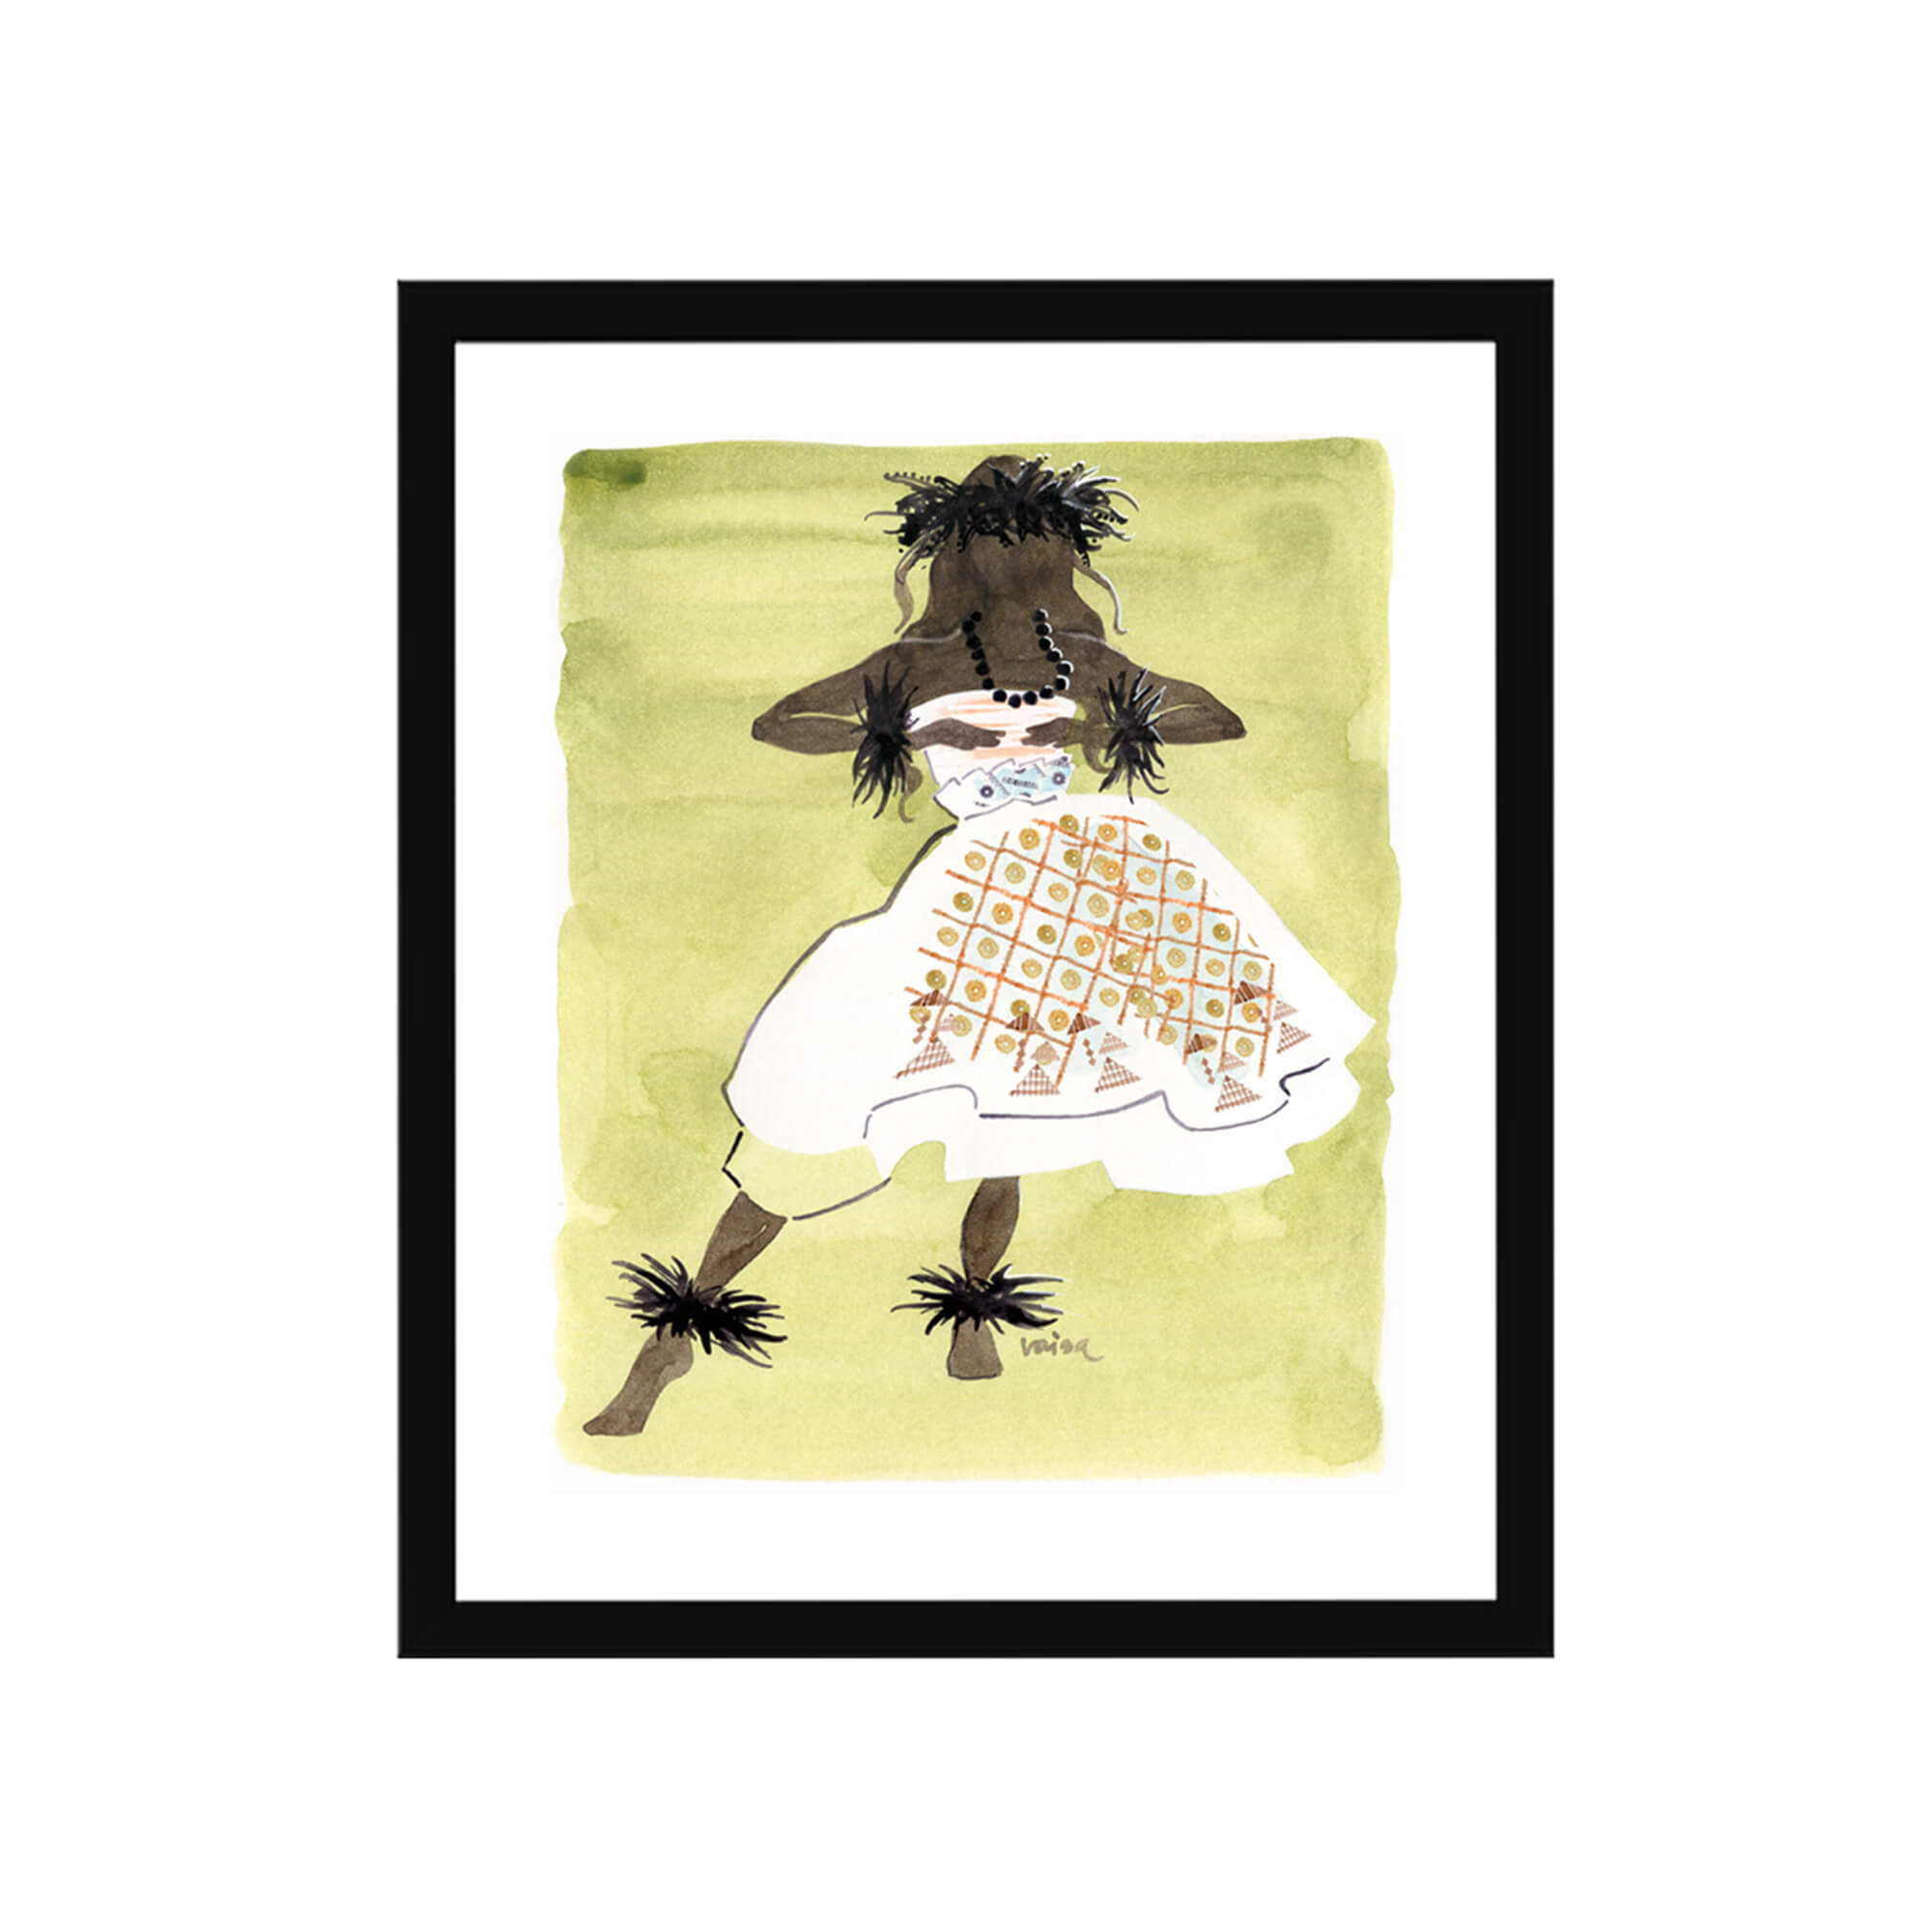 Framed paper giclée print featuring a watercolor artwork of a hula green on avocado green background by Hawaii artist Lovisa Oliv